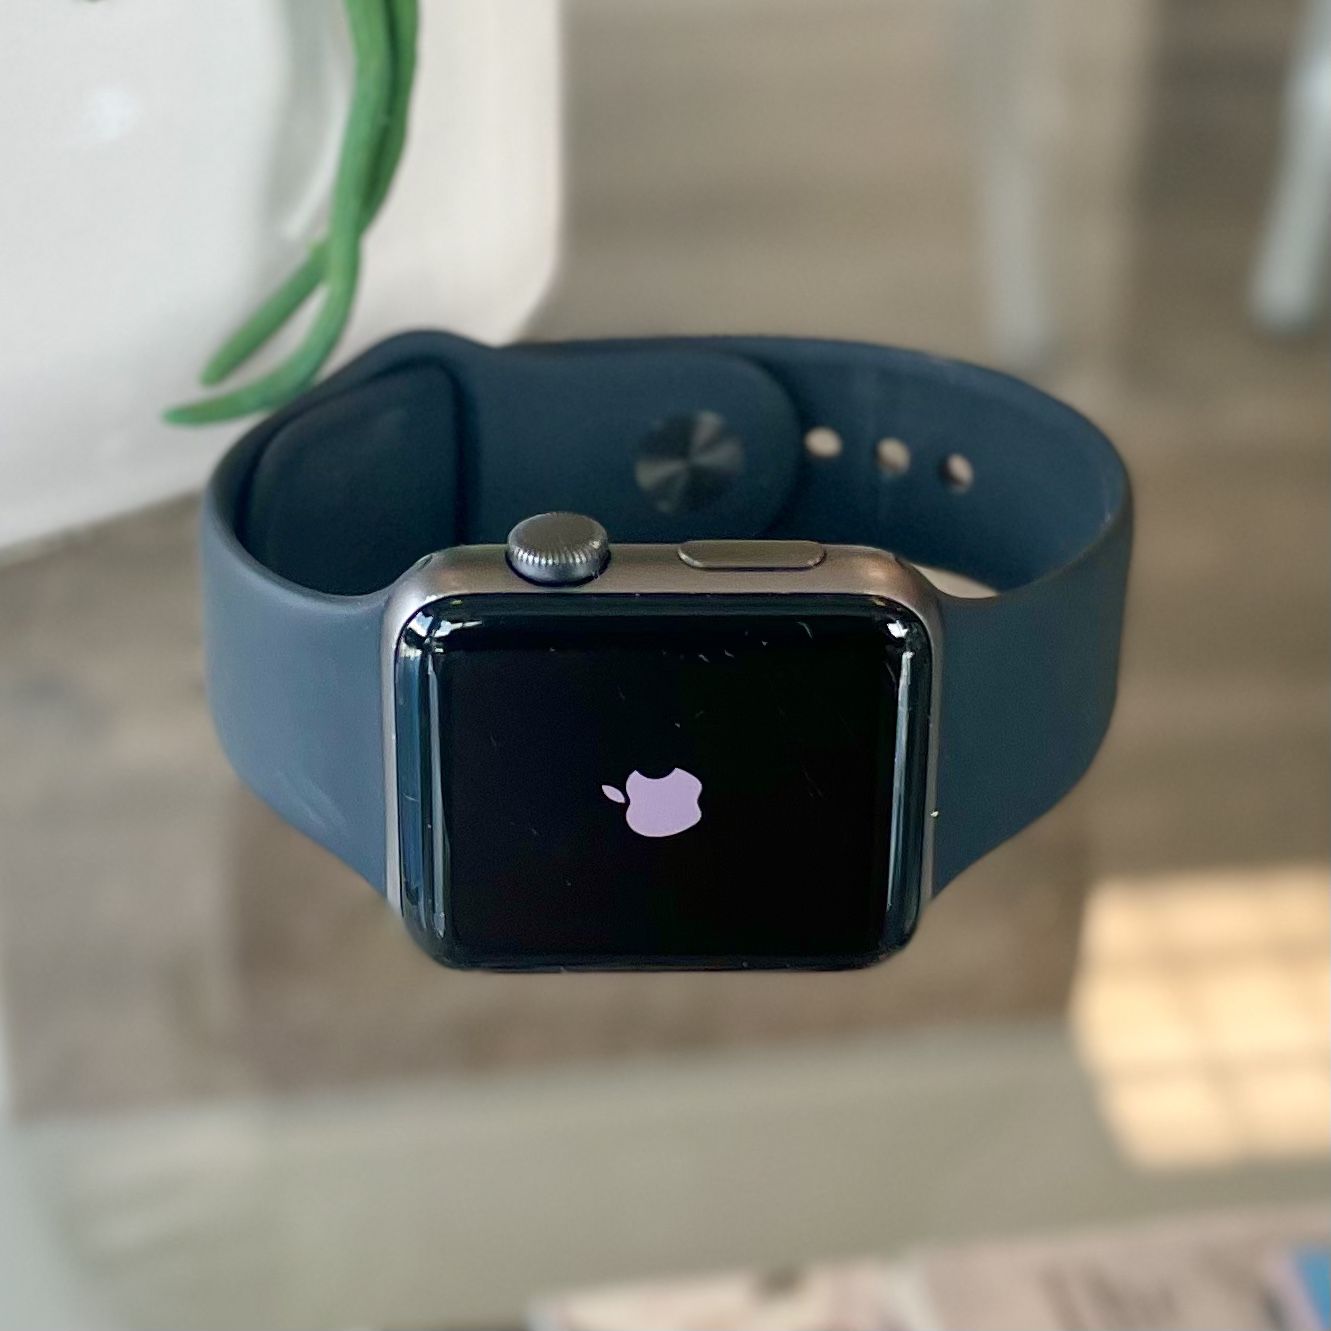 Apple Watch Series 3 (Payments/Trade In Available)